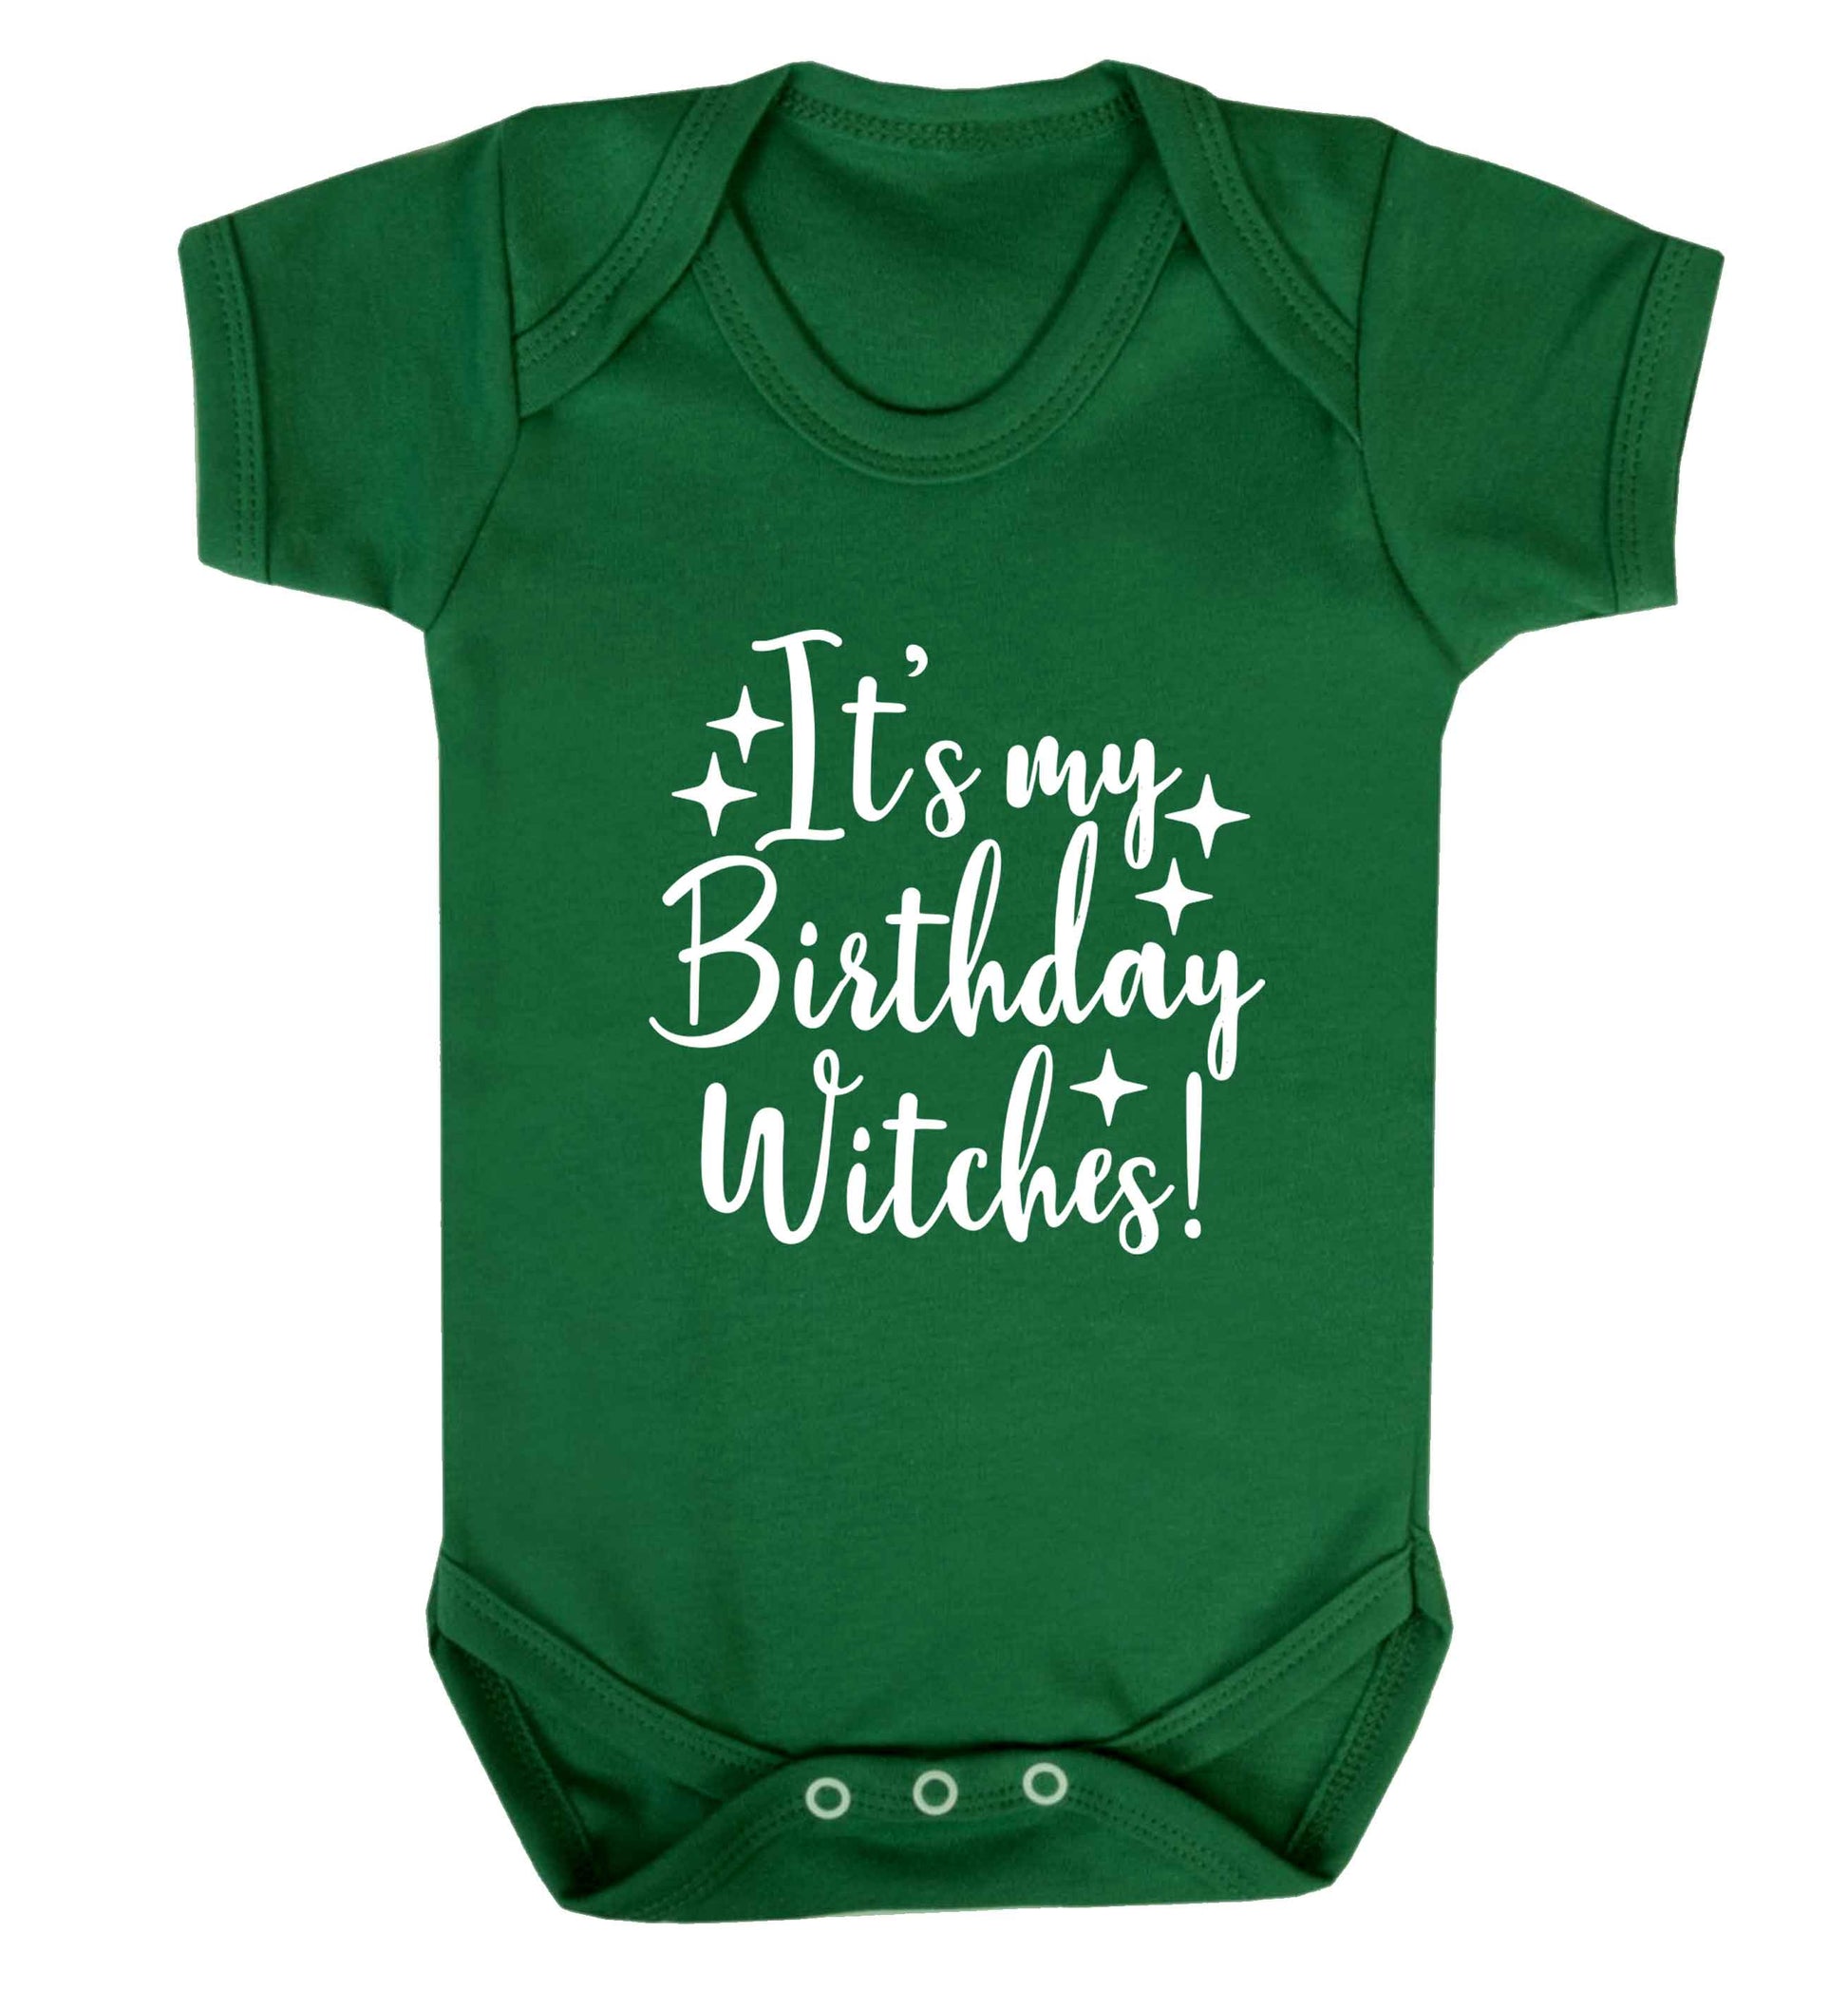 It's my birthday witches!baby vest green 18-24 months